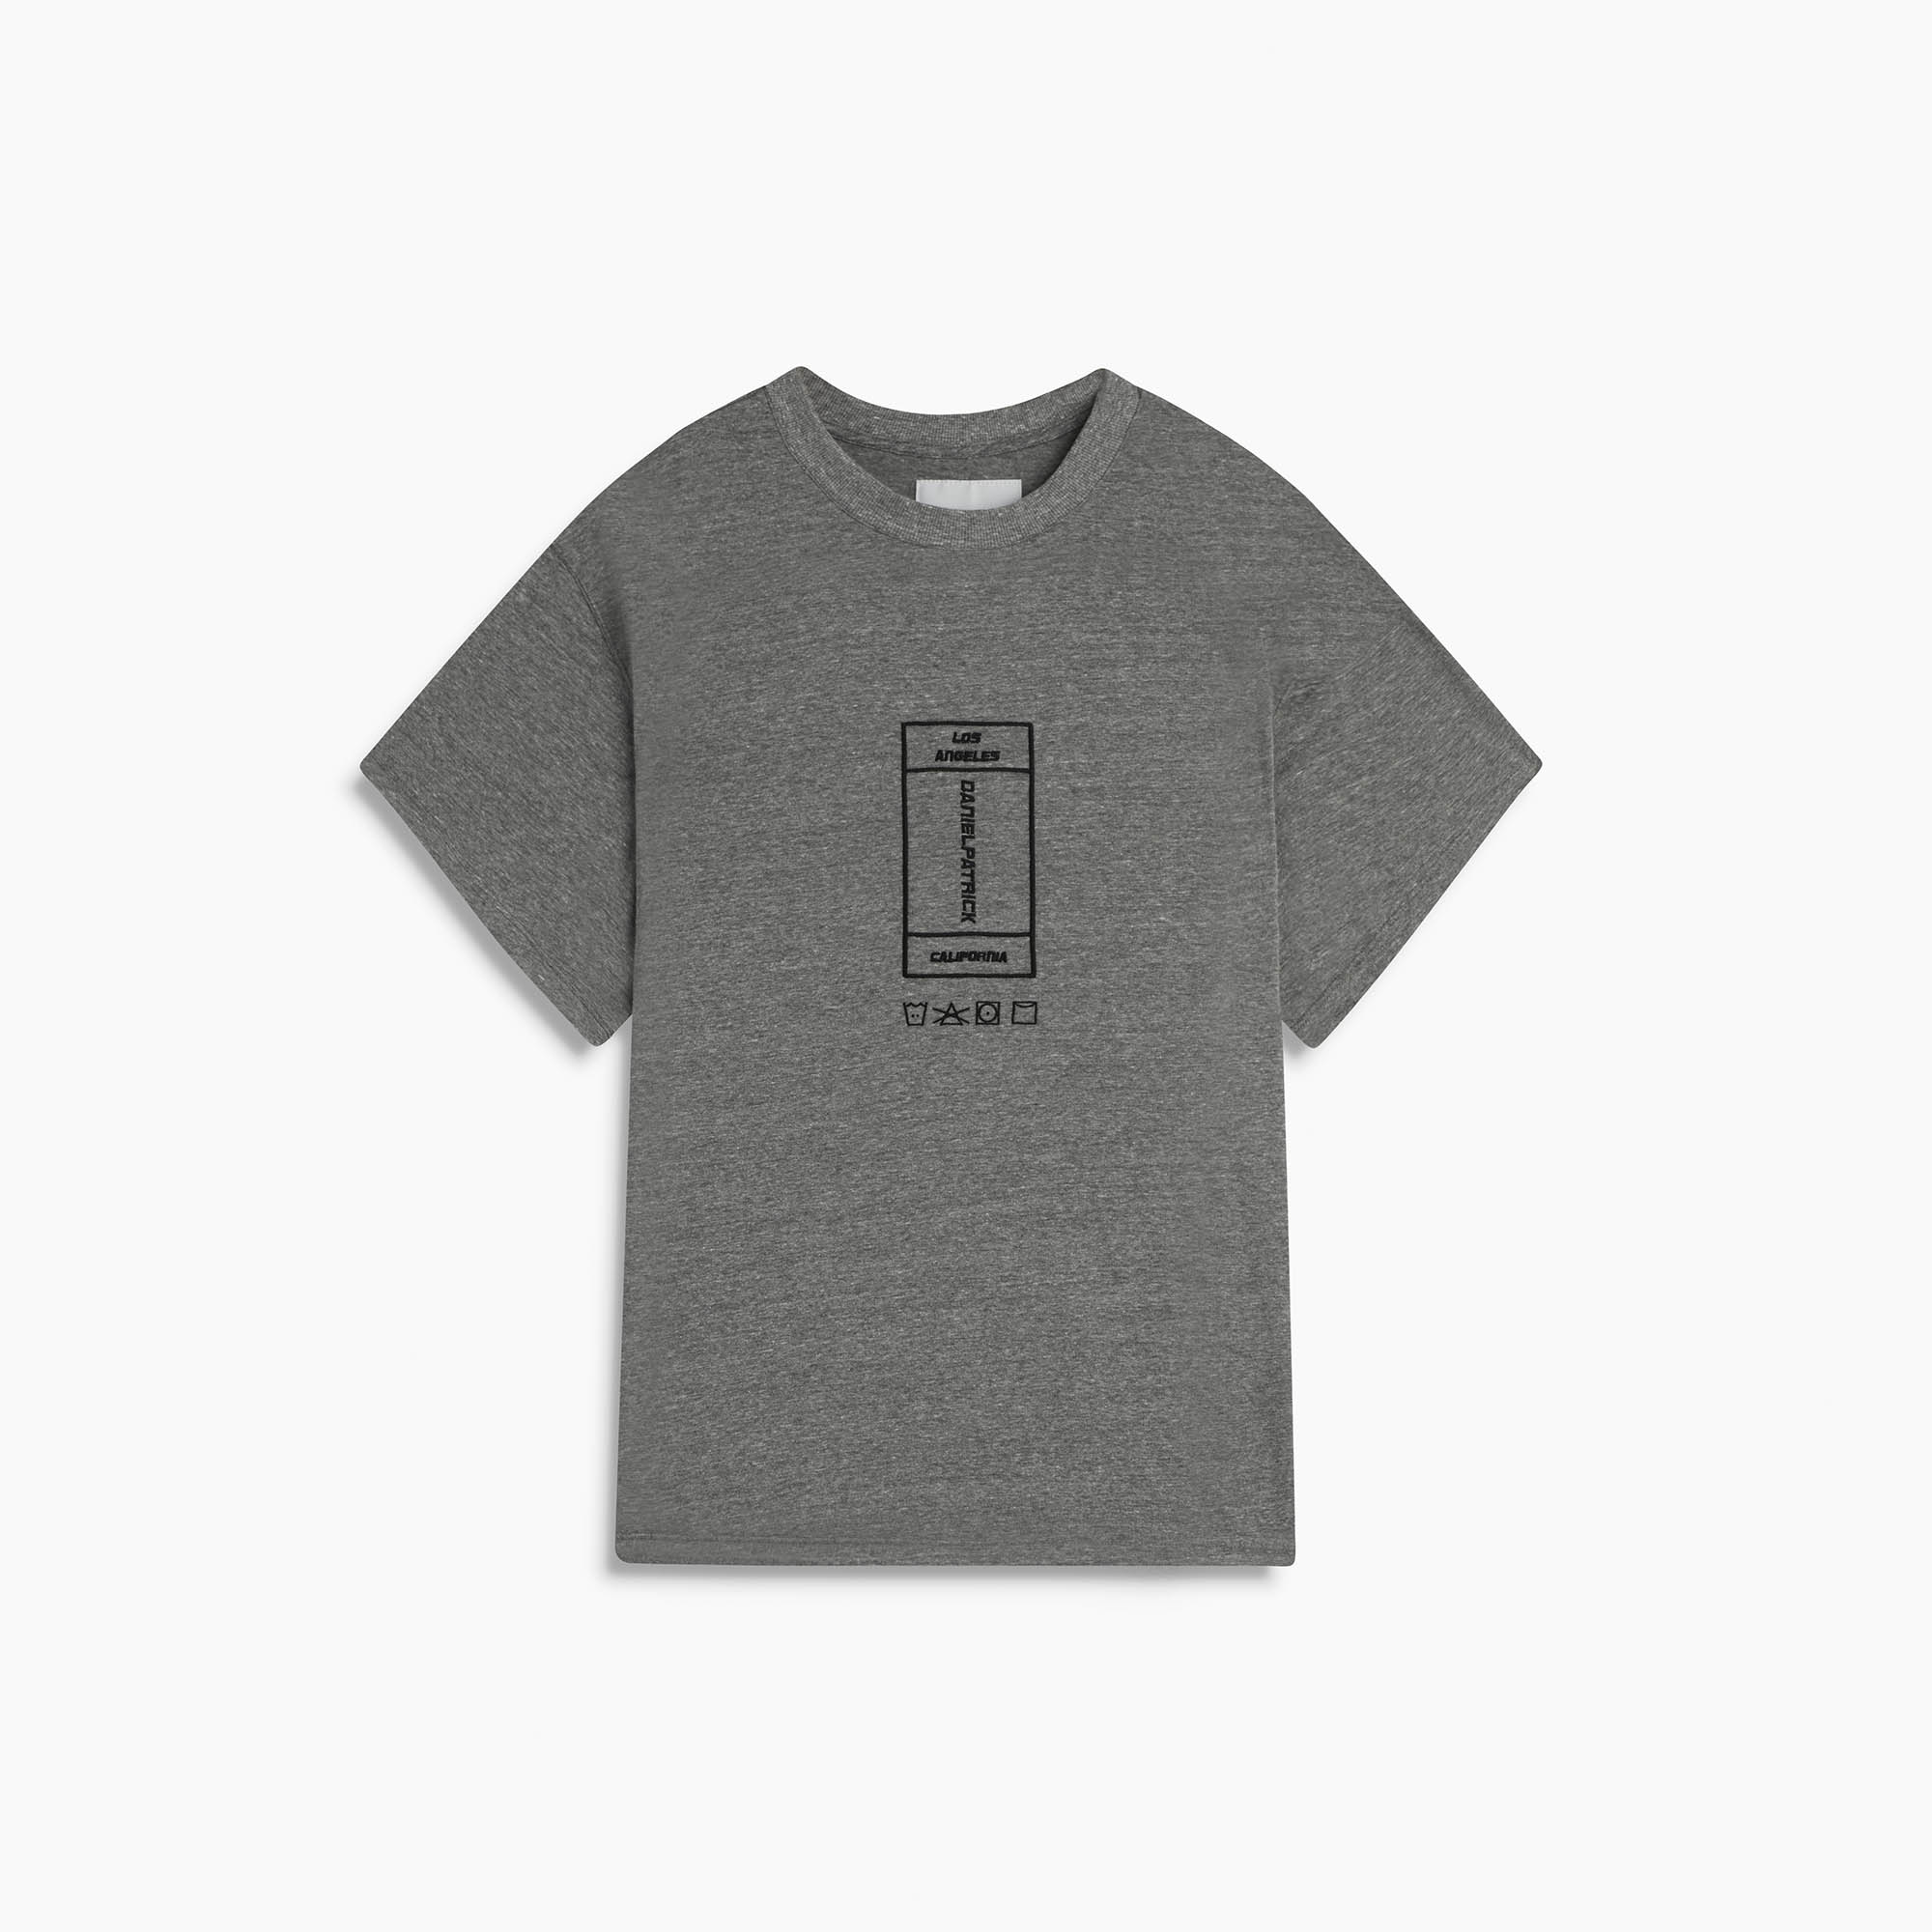 embroidered vertical rectangle tee / heather grey